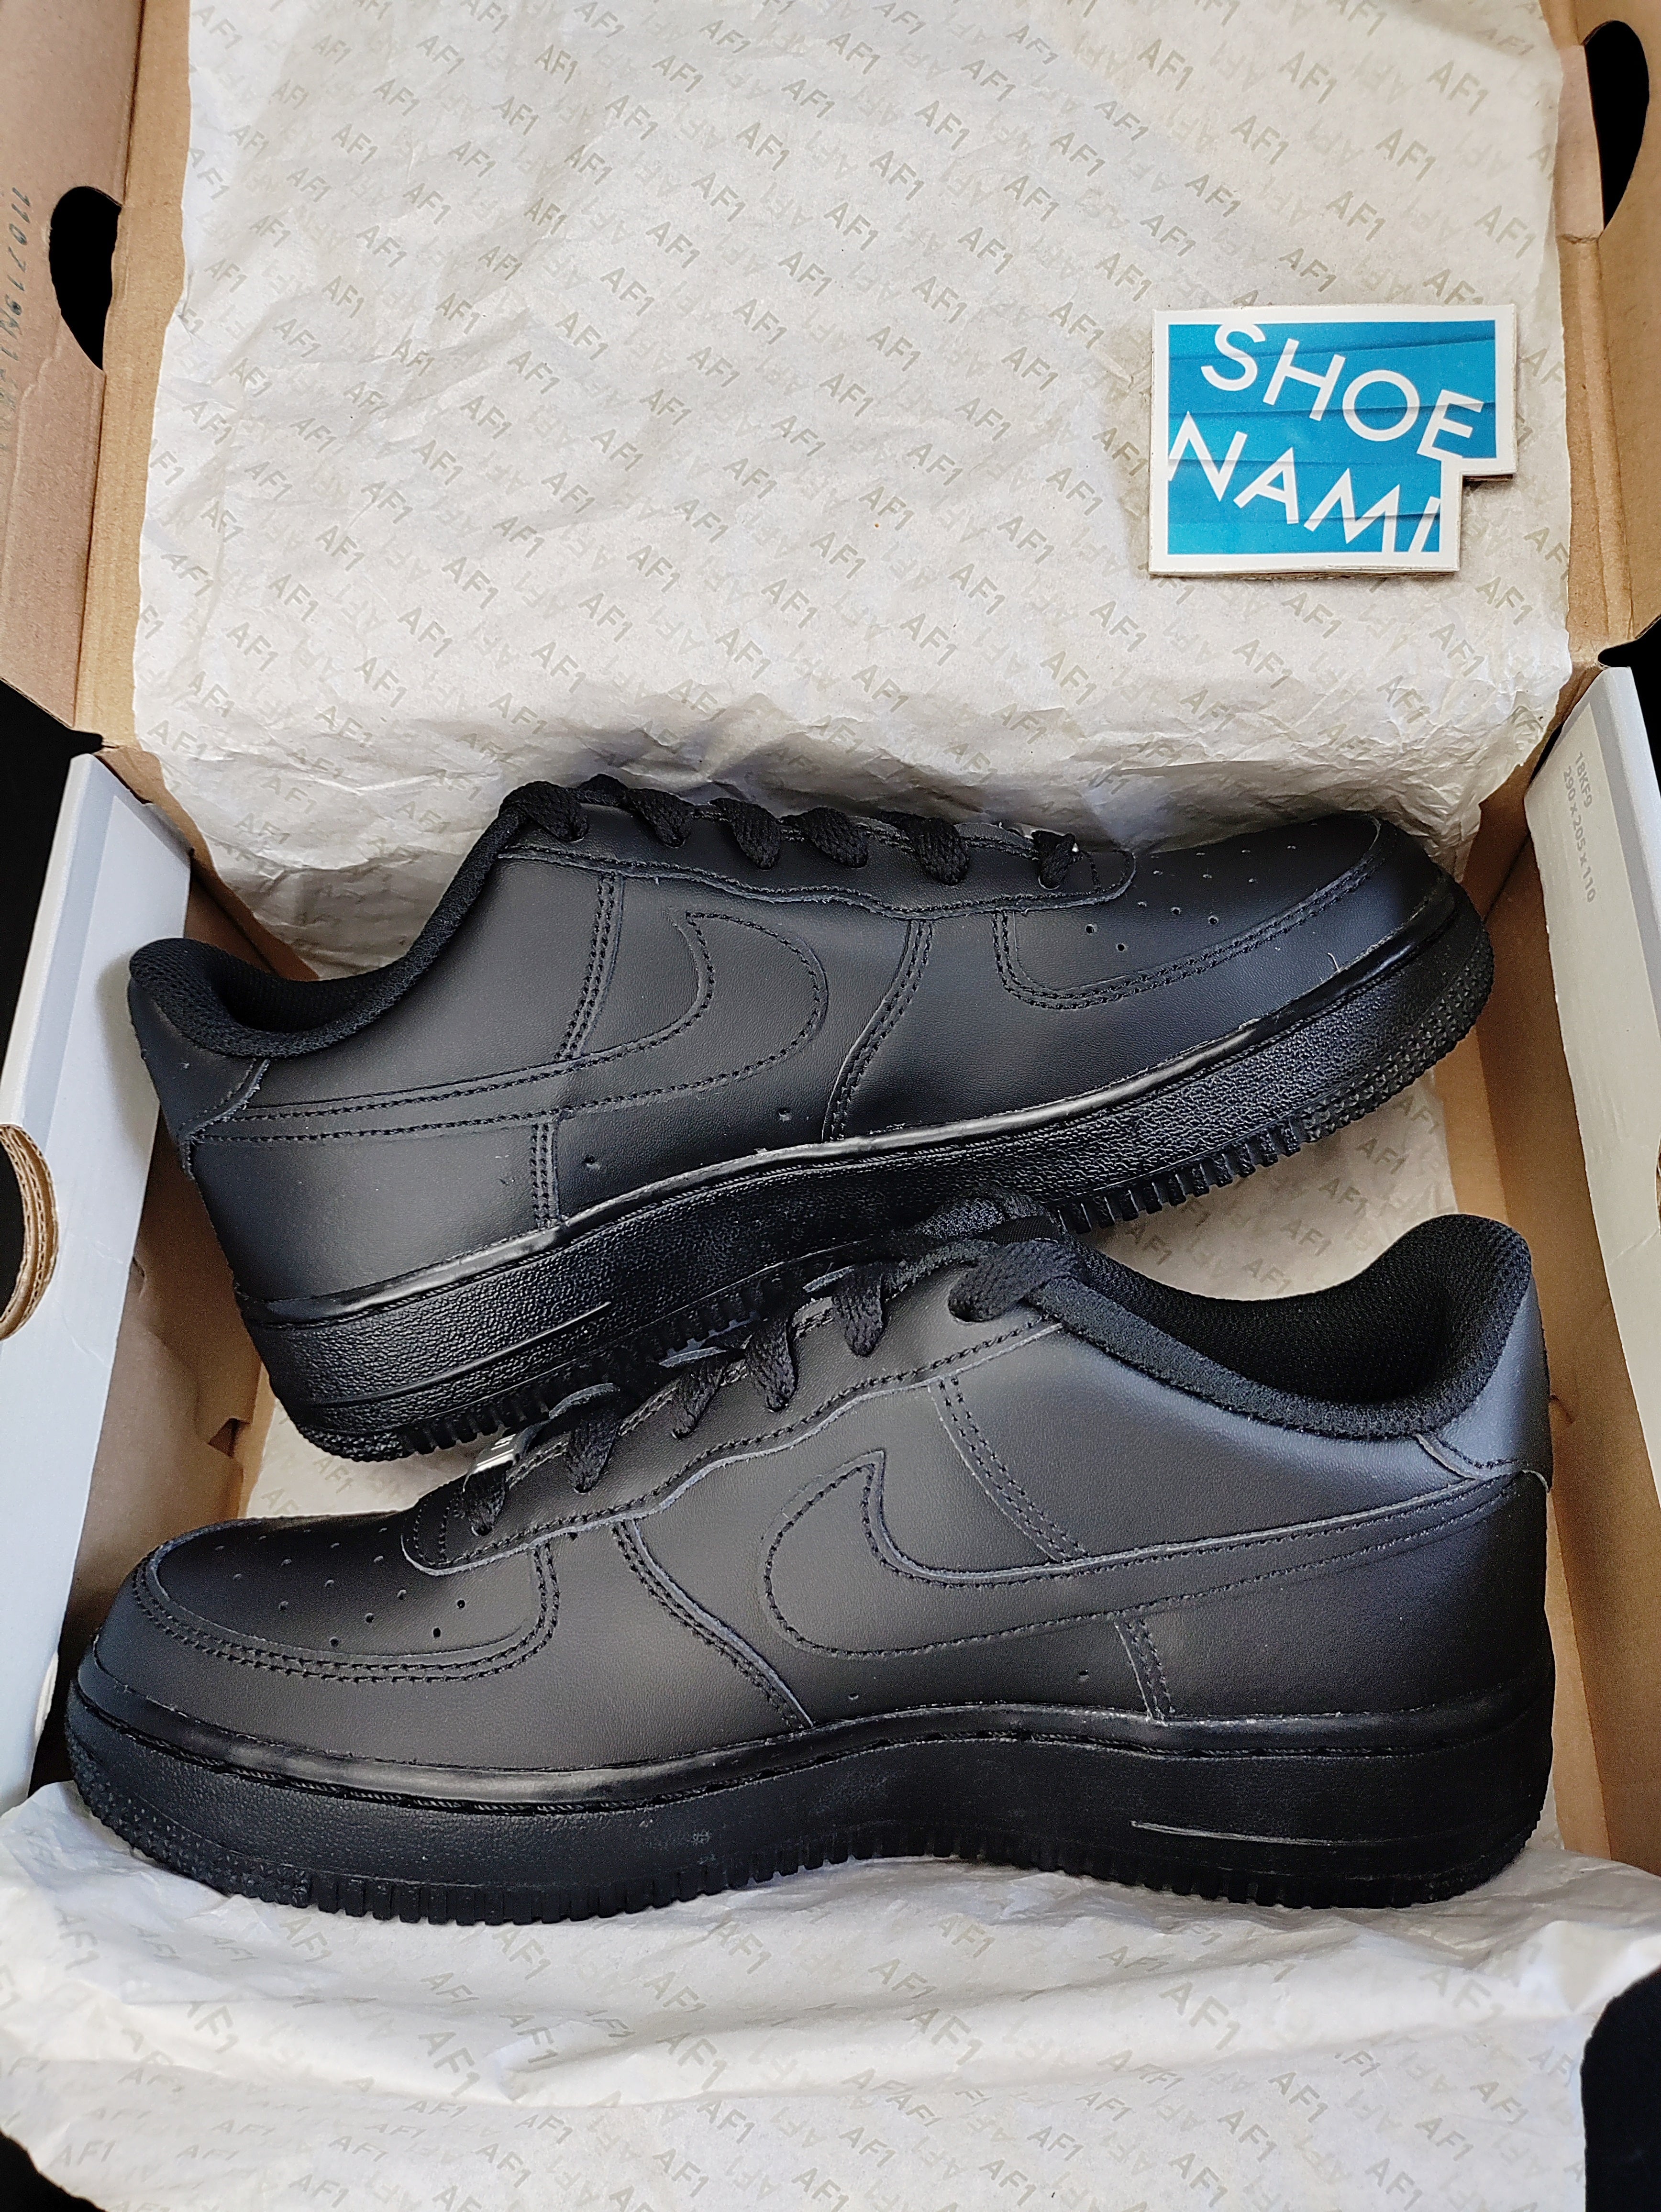 Nike Air Force 1 (GS) Triple Black 314192 009 Size 4Y with BOX